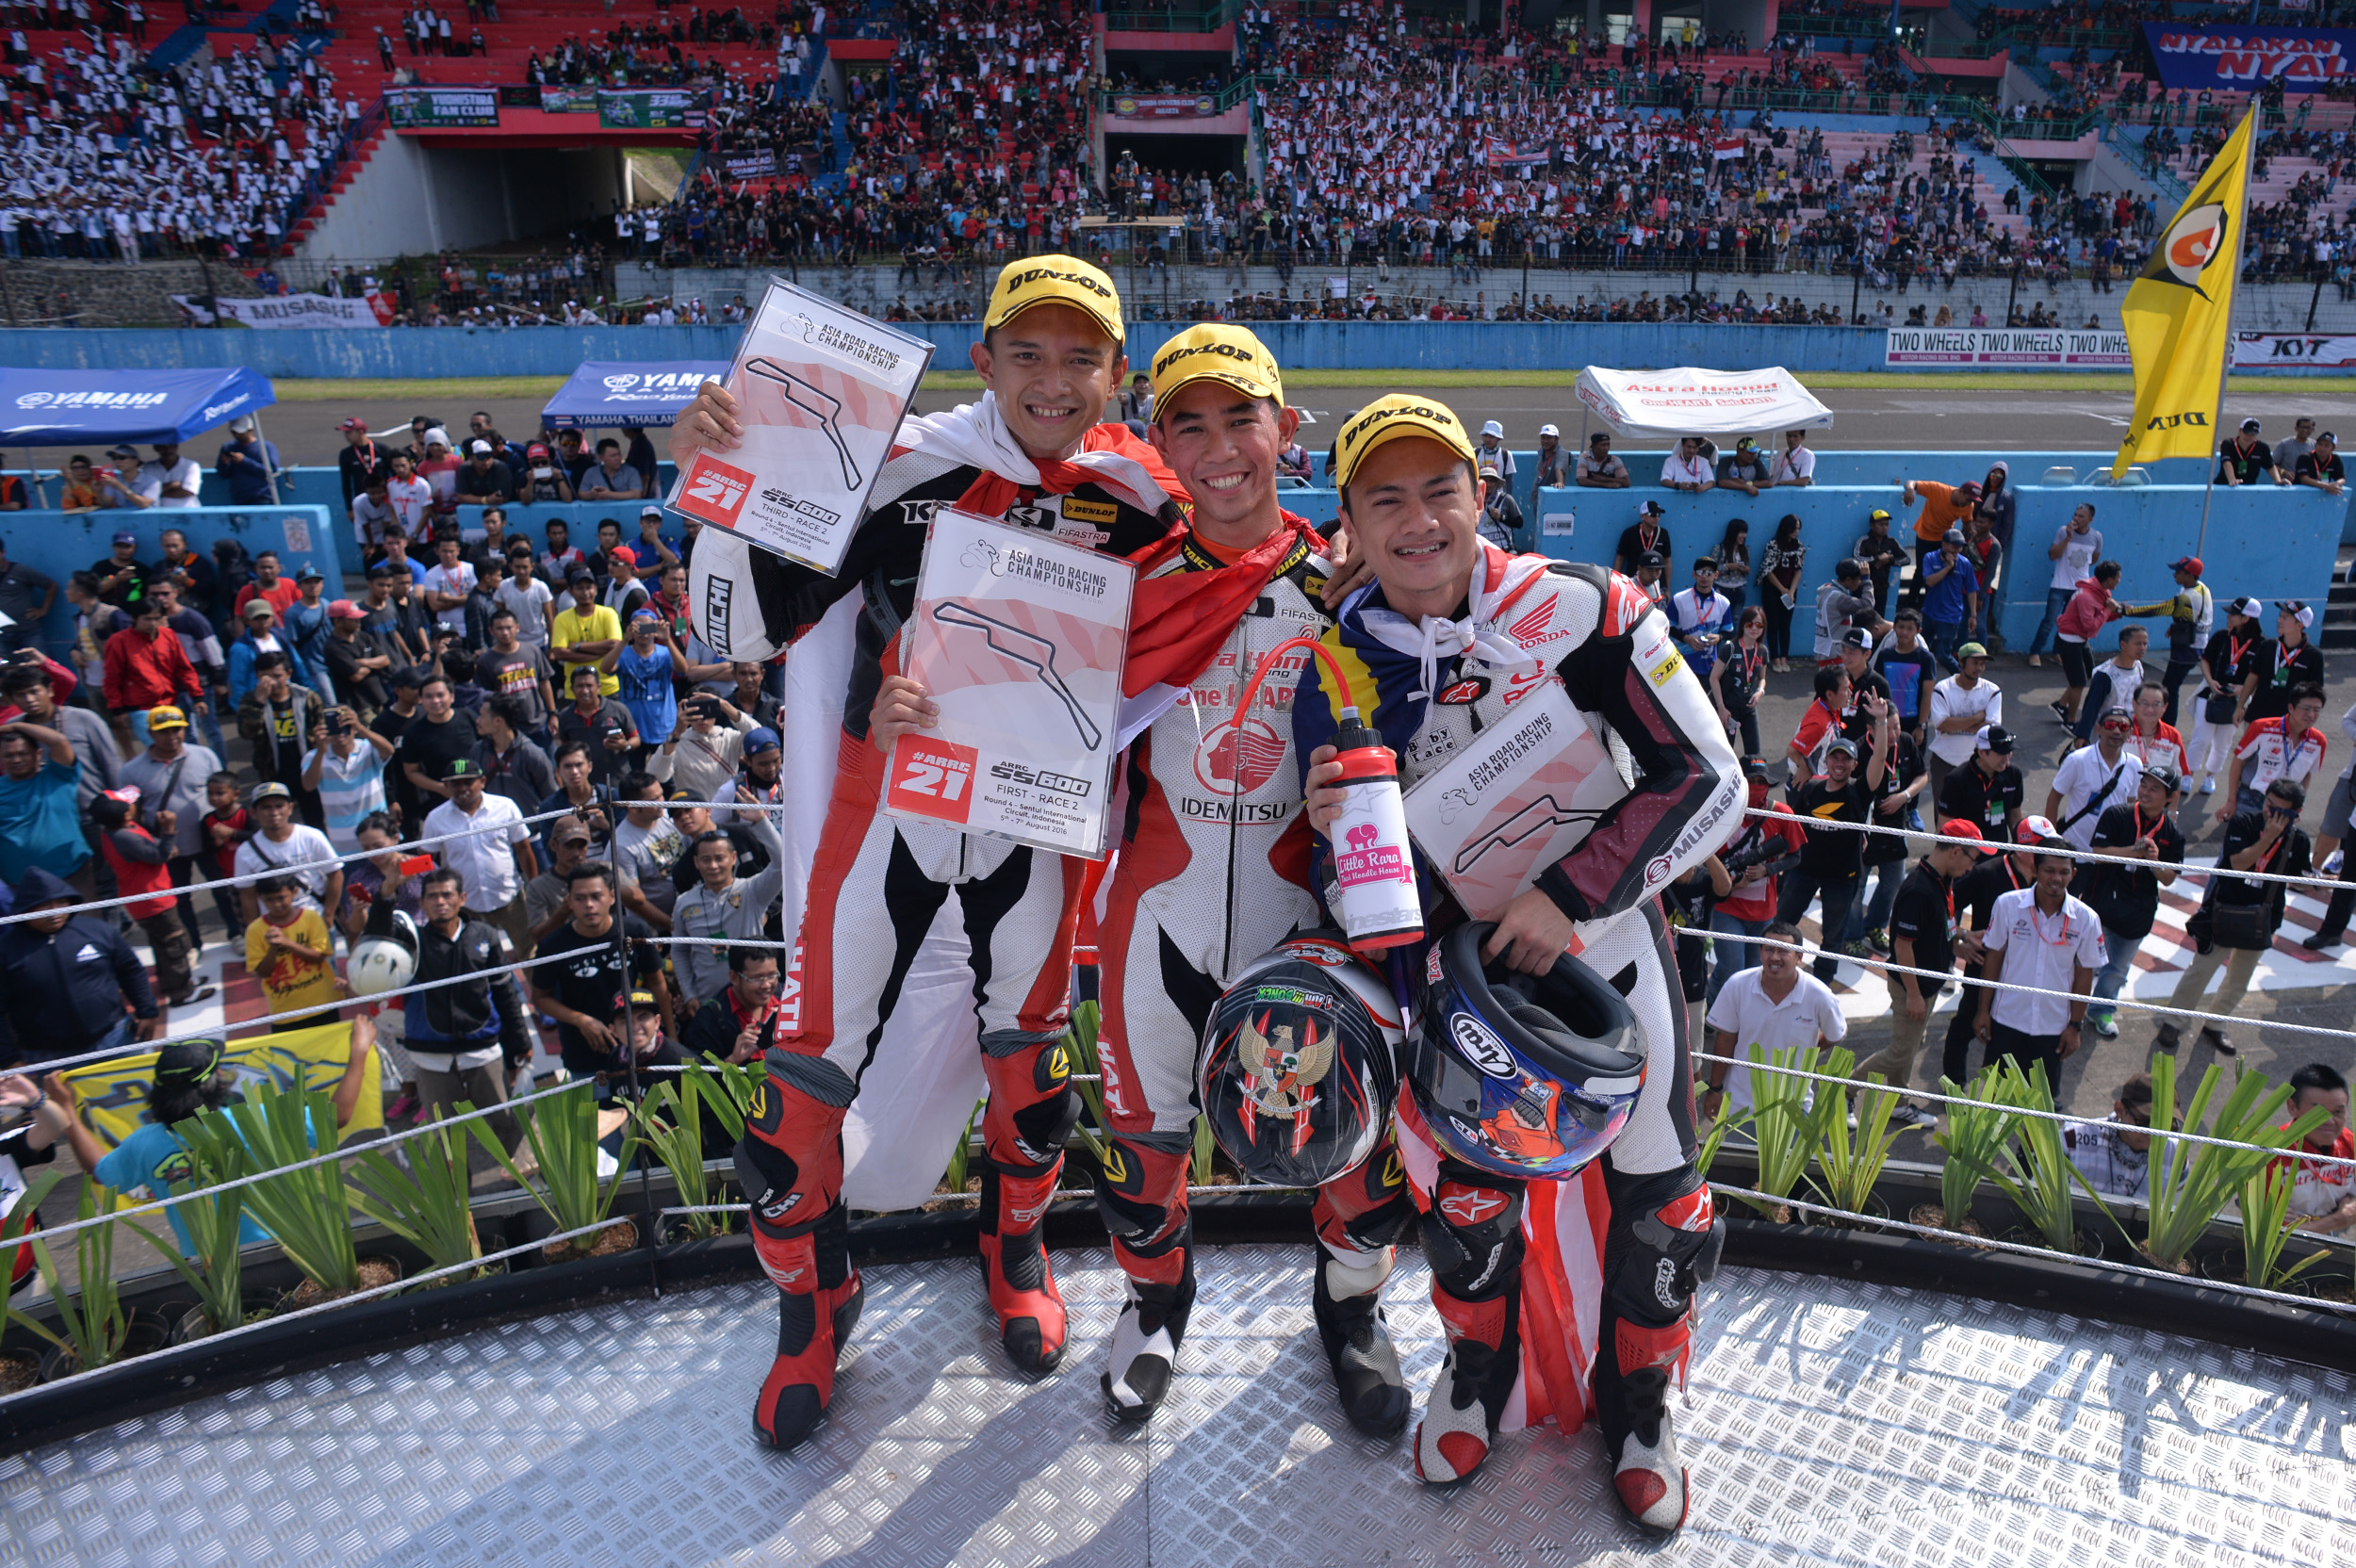 GERRY SALIM IS YOUNG PRINCE OF SENTUL (SUPERSPORTS 600cc RACE REPORT)